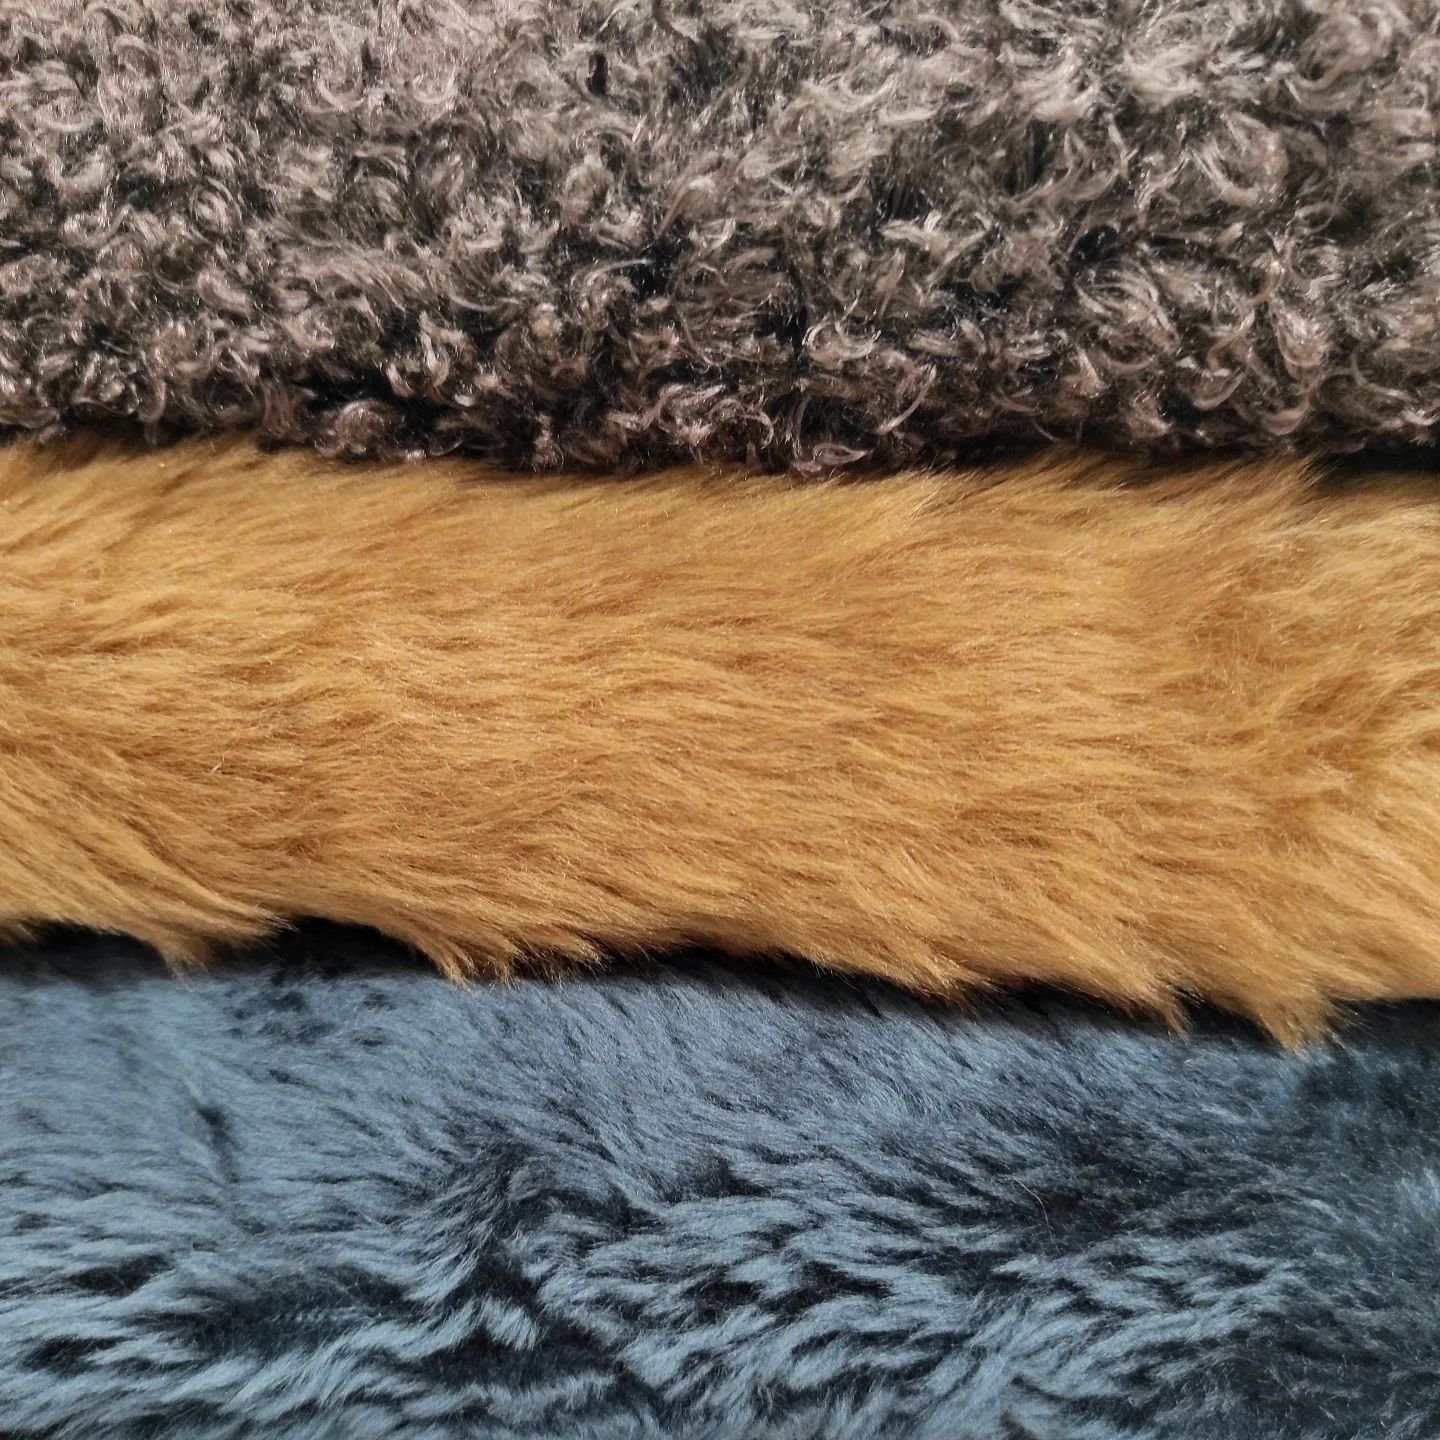 Faux fur in now...so nice fluffy and soft. #thehubyeovil #scrapmaterial #scrappaper #fauxfur #softtoys #softfurnishings #arttherapy #artsandcraftschildren #sewinproject #fabric #samplebooks